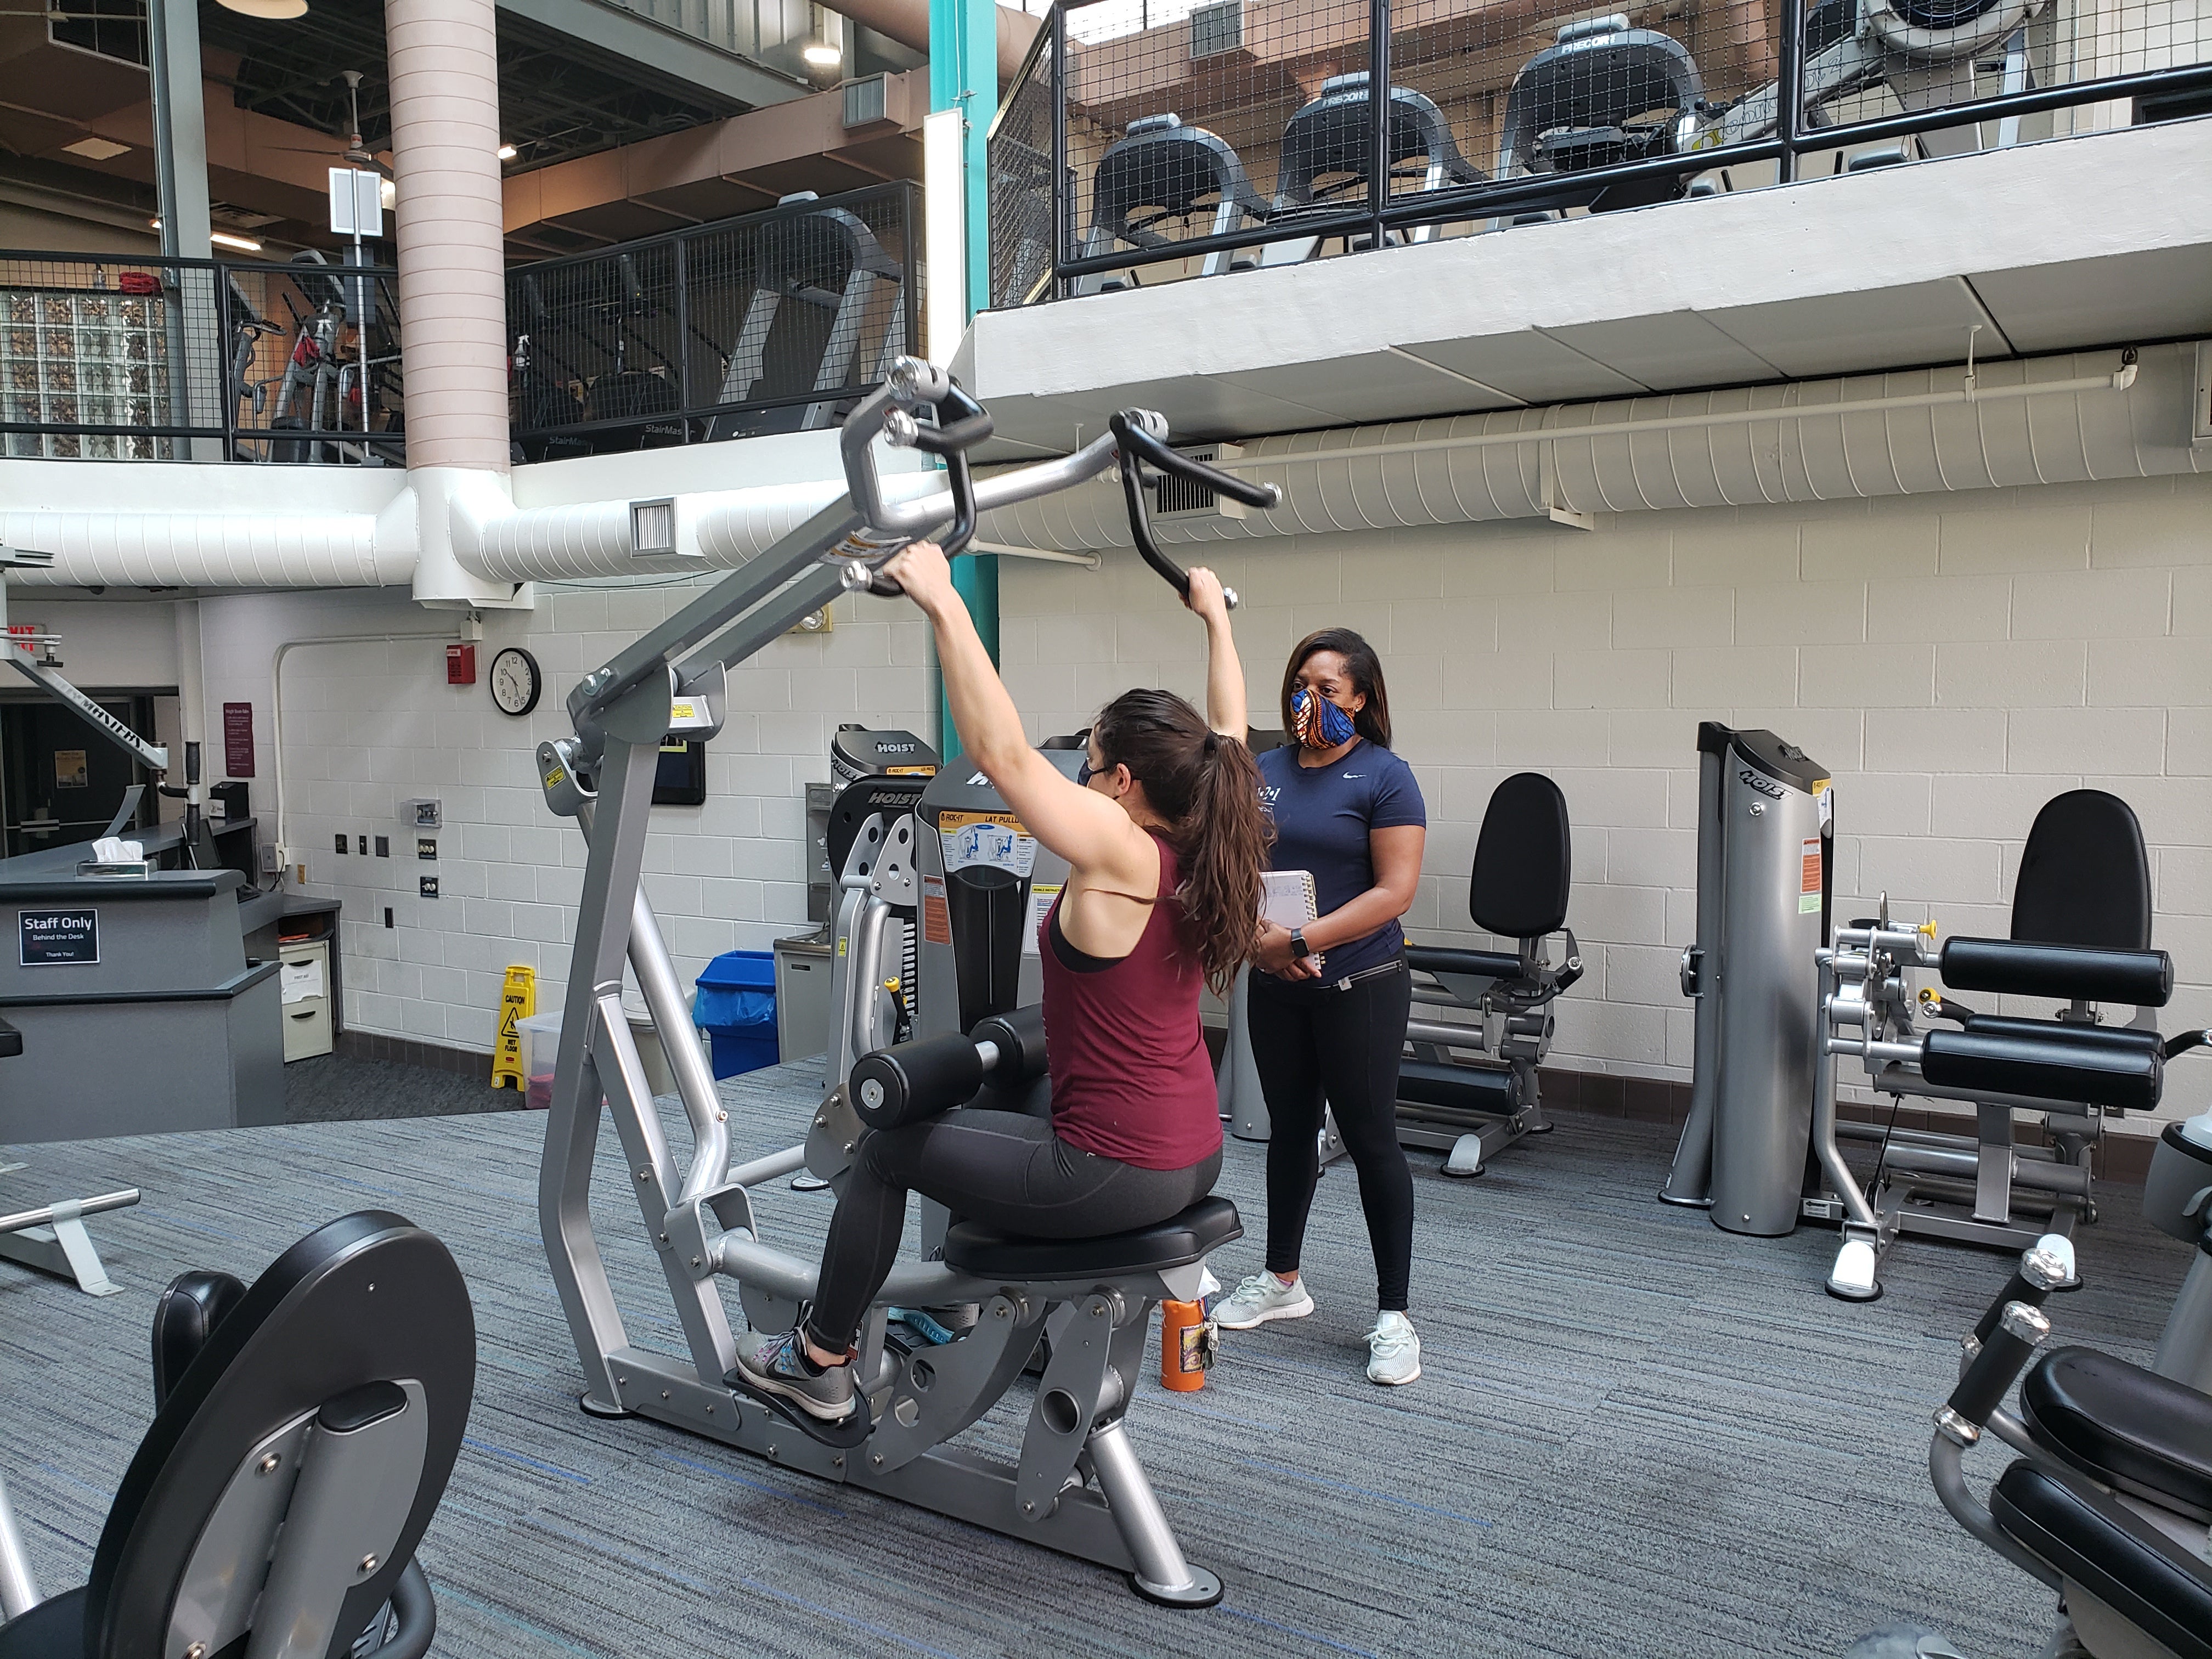 Woman personal training client on lat pulldown